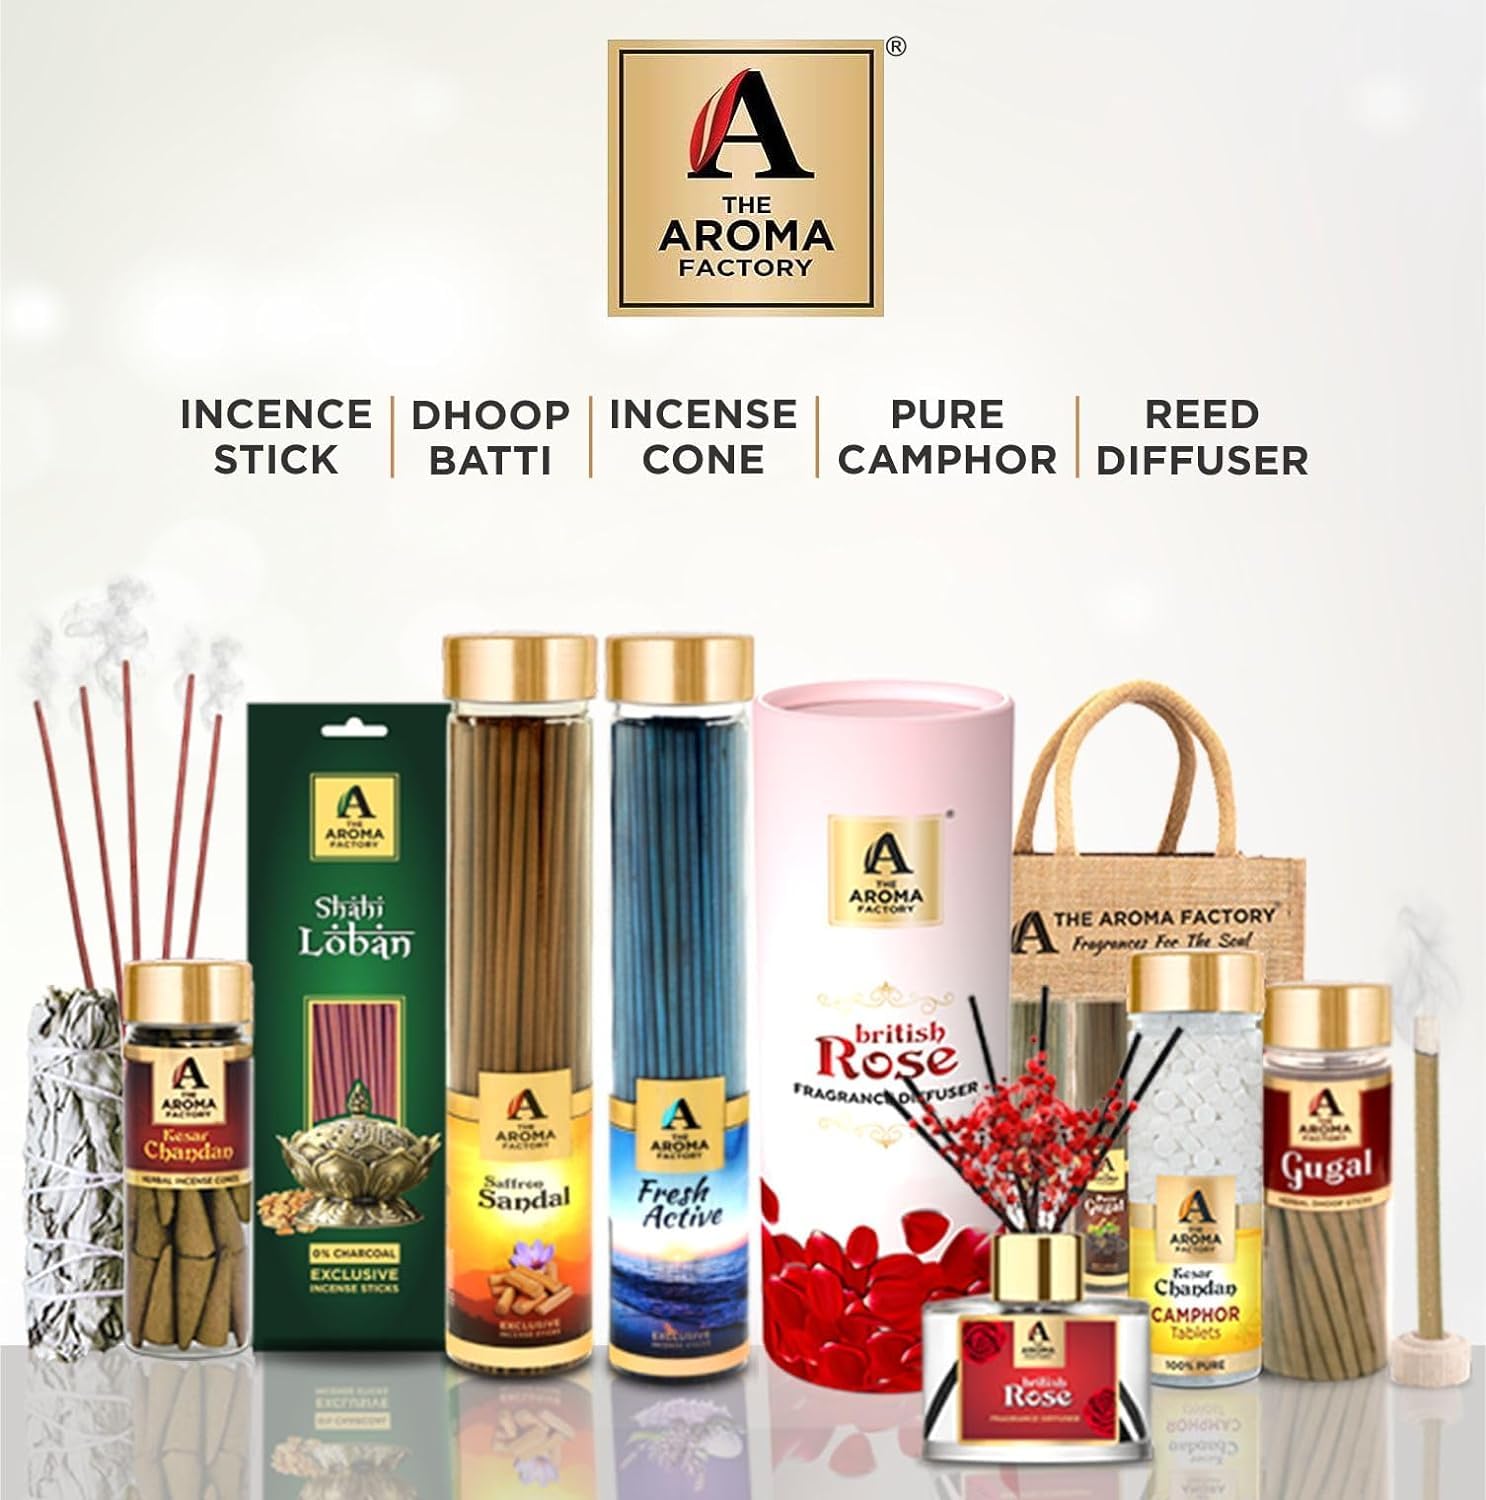 The Aroma Factory Happy Birthday Boy Friend Gift with Card (25 Swad Candy, Fresh Active Agarbatti Bottle, Mogra Dhoopbatti) in Jute Bag